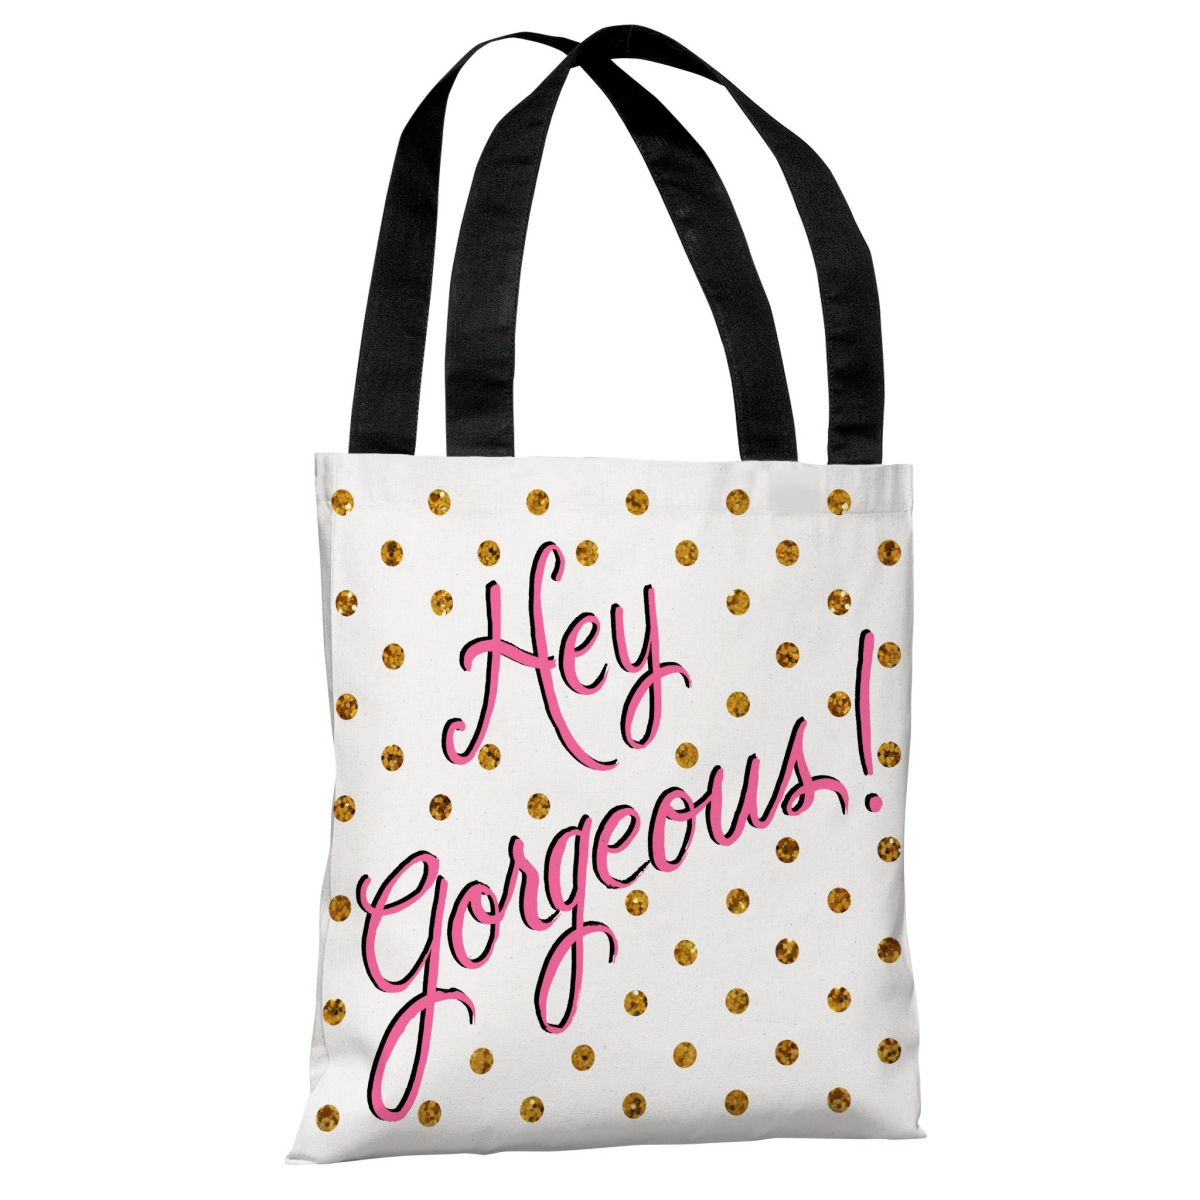 73062tt18p 18 In. Hello Gorgeous Dots & Gold Dots Polyester Tote Bag By Timree Gold - White, Pink & Gold